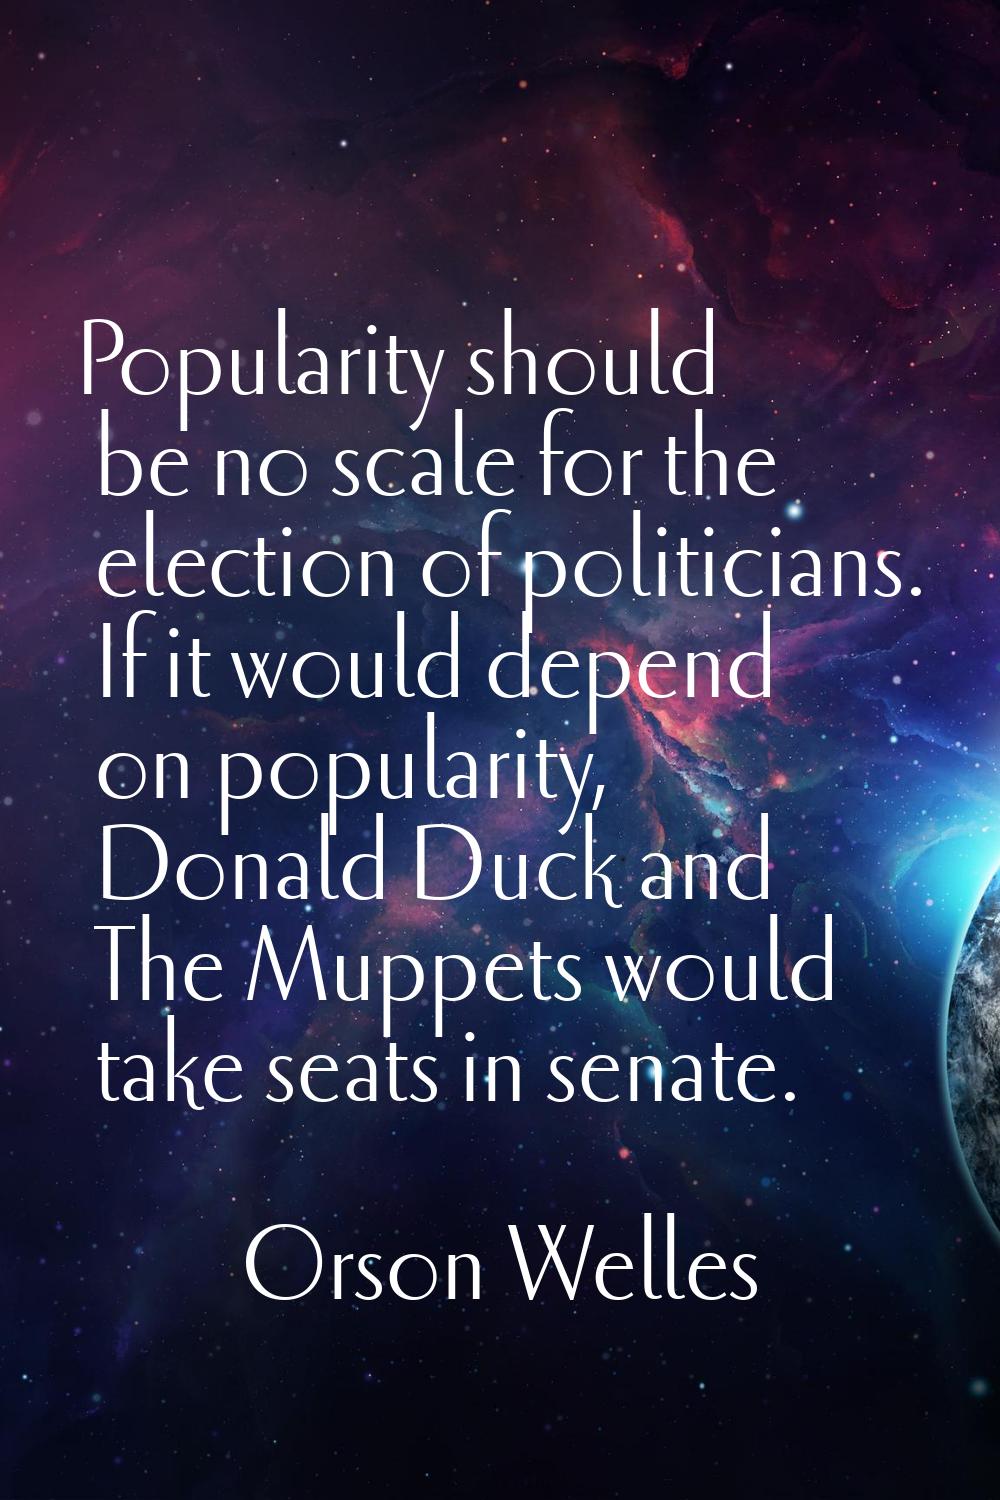 Popularity should be no scale for the election of politicians. If it would depend on popularity, Do